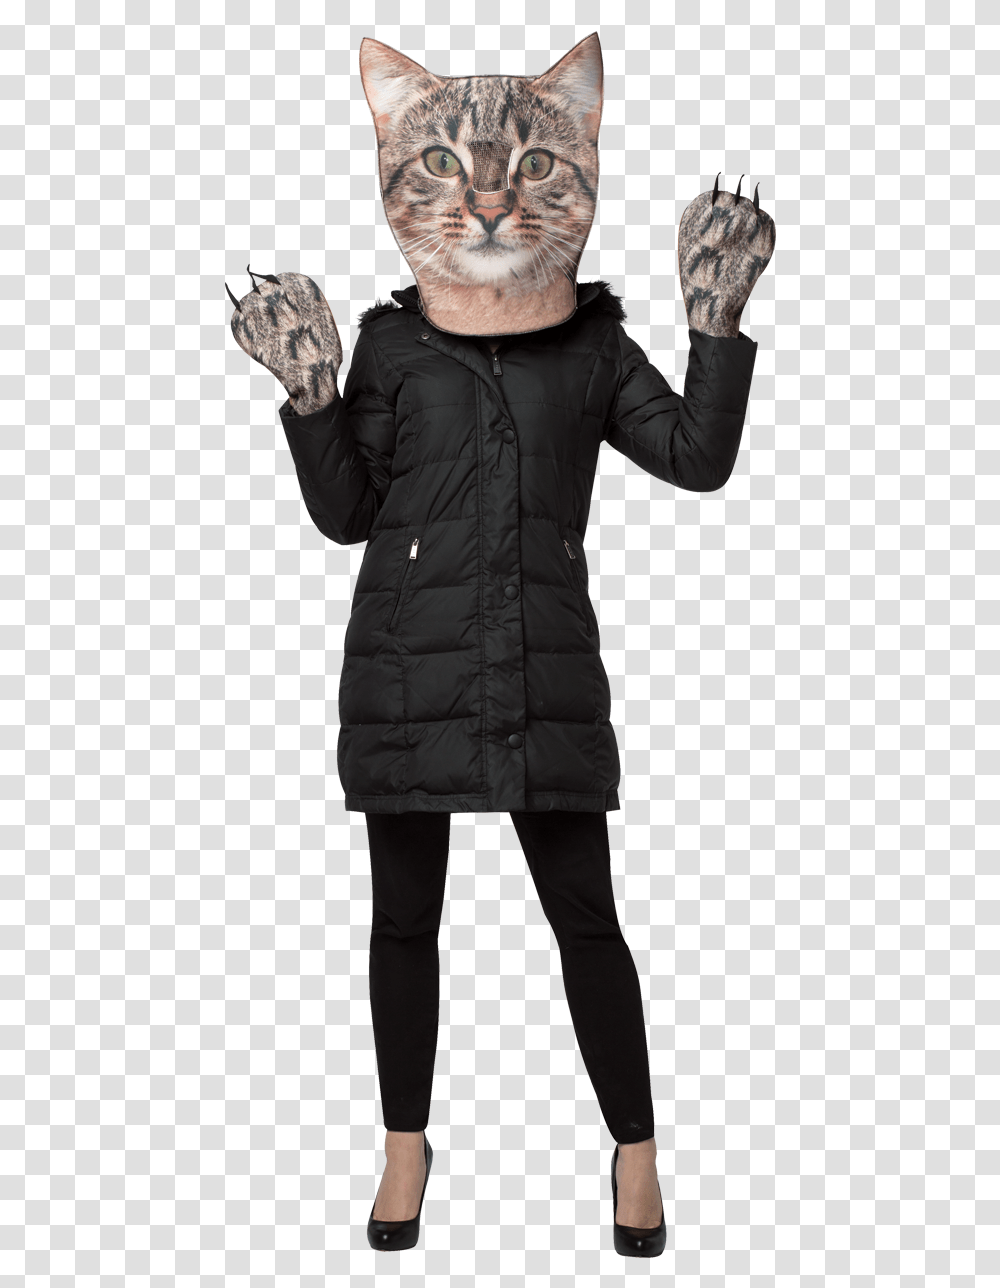 Cat Halloween Costume For Human, Coat, Person, Jacket Transparent Png